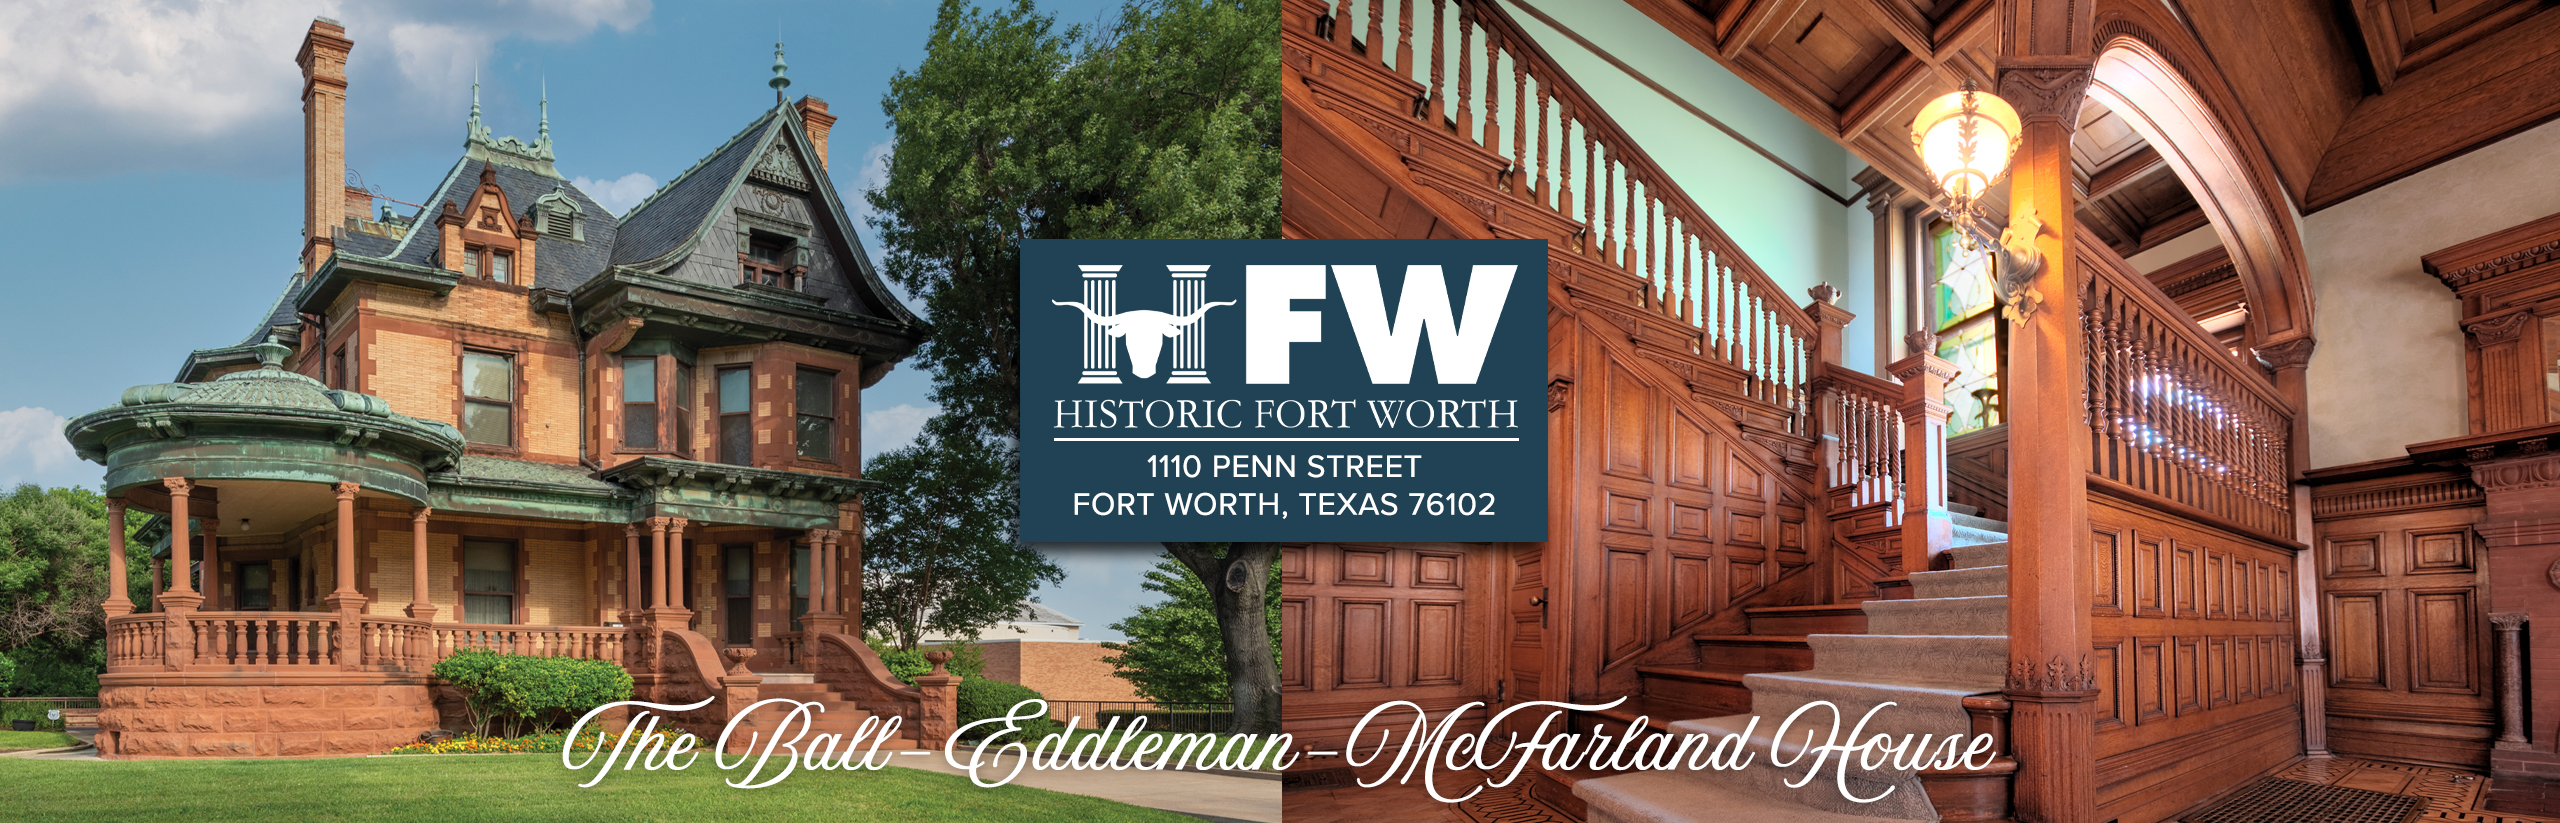 Home Historic Fort Worth